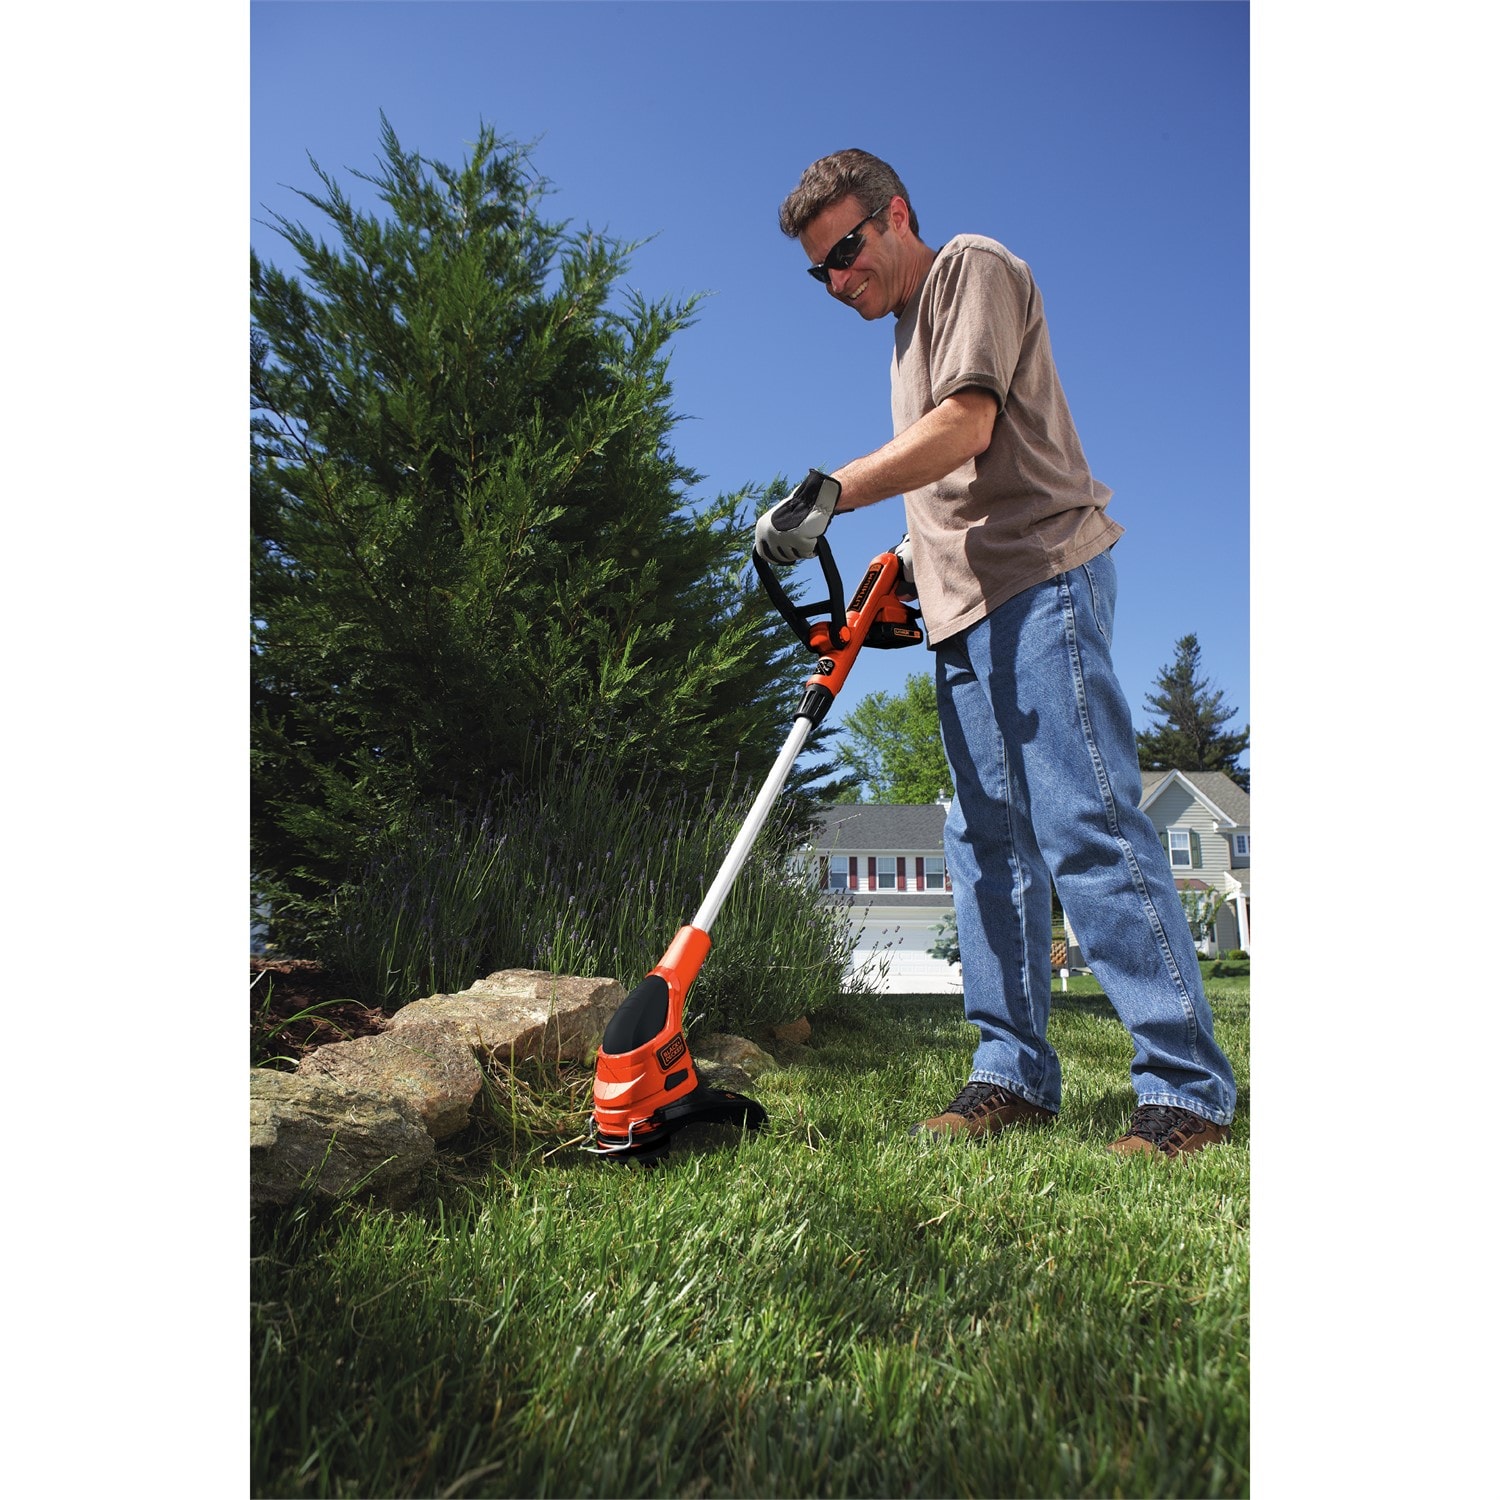 Black & Decker LST220 20V MAX Lithium String Trimmer and Edger Review -  Home Construction Improvement